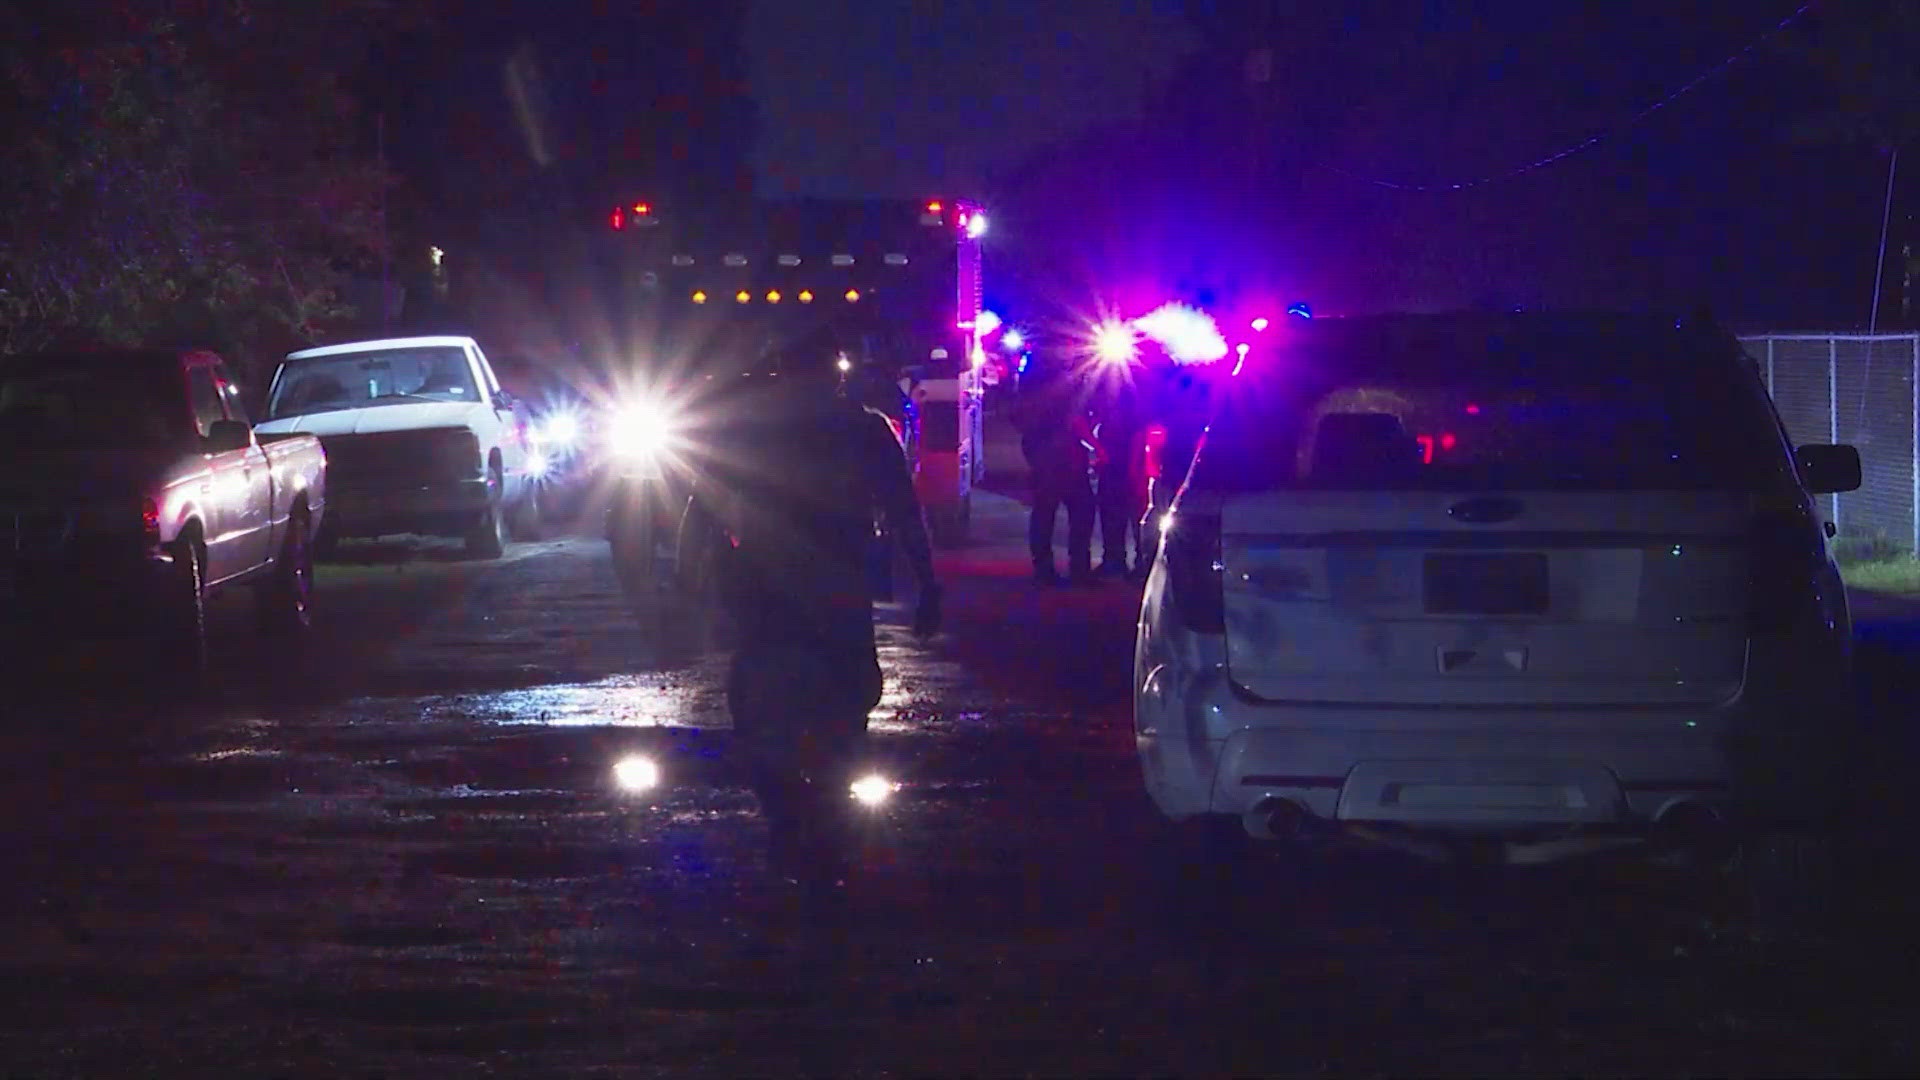 Two Harris County Sheriff's Office deputies shot and killed a man Thursday night, according to HCSO Assistant Chief Tommy Diaz.